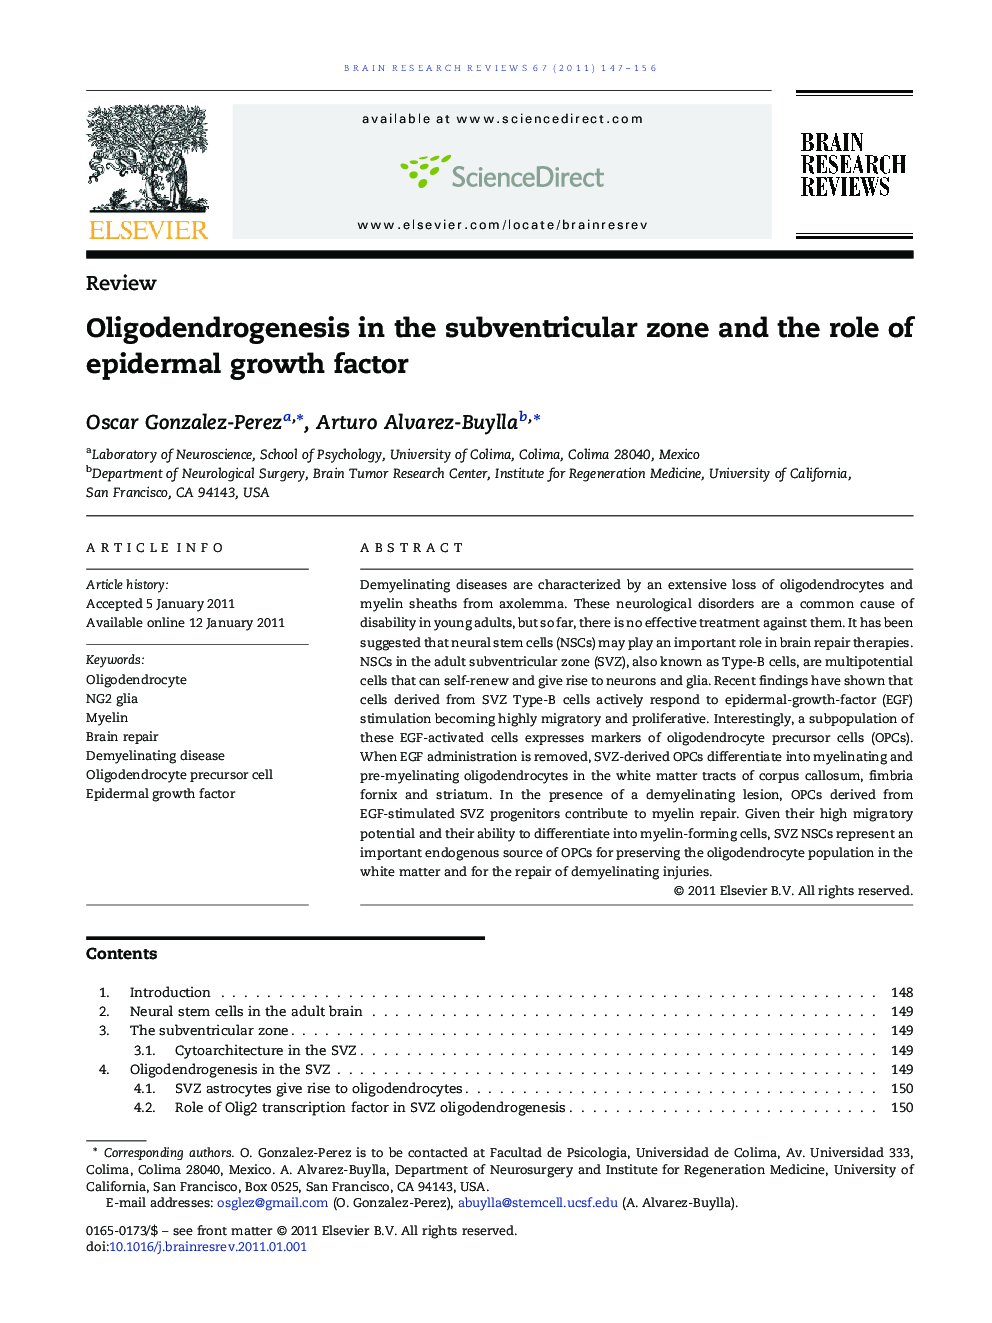 ReviewOligodendrogenesis in the subventricular zone and the role of epidermal growth factor